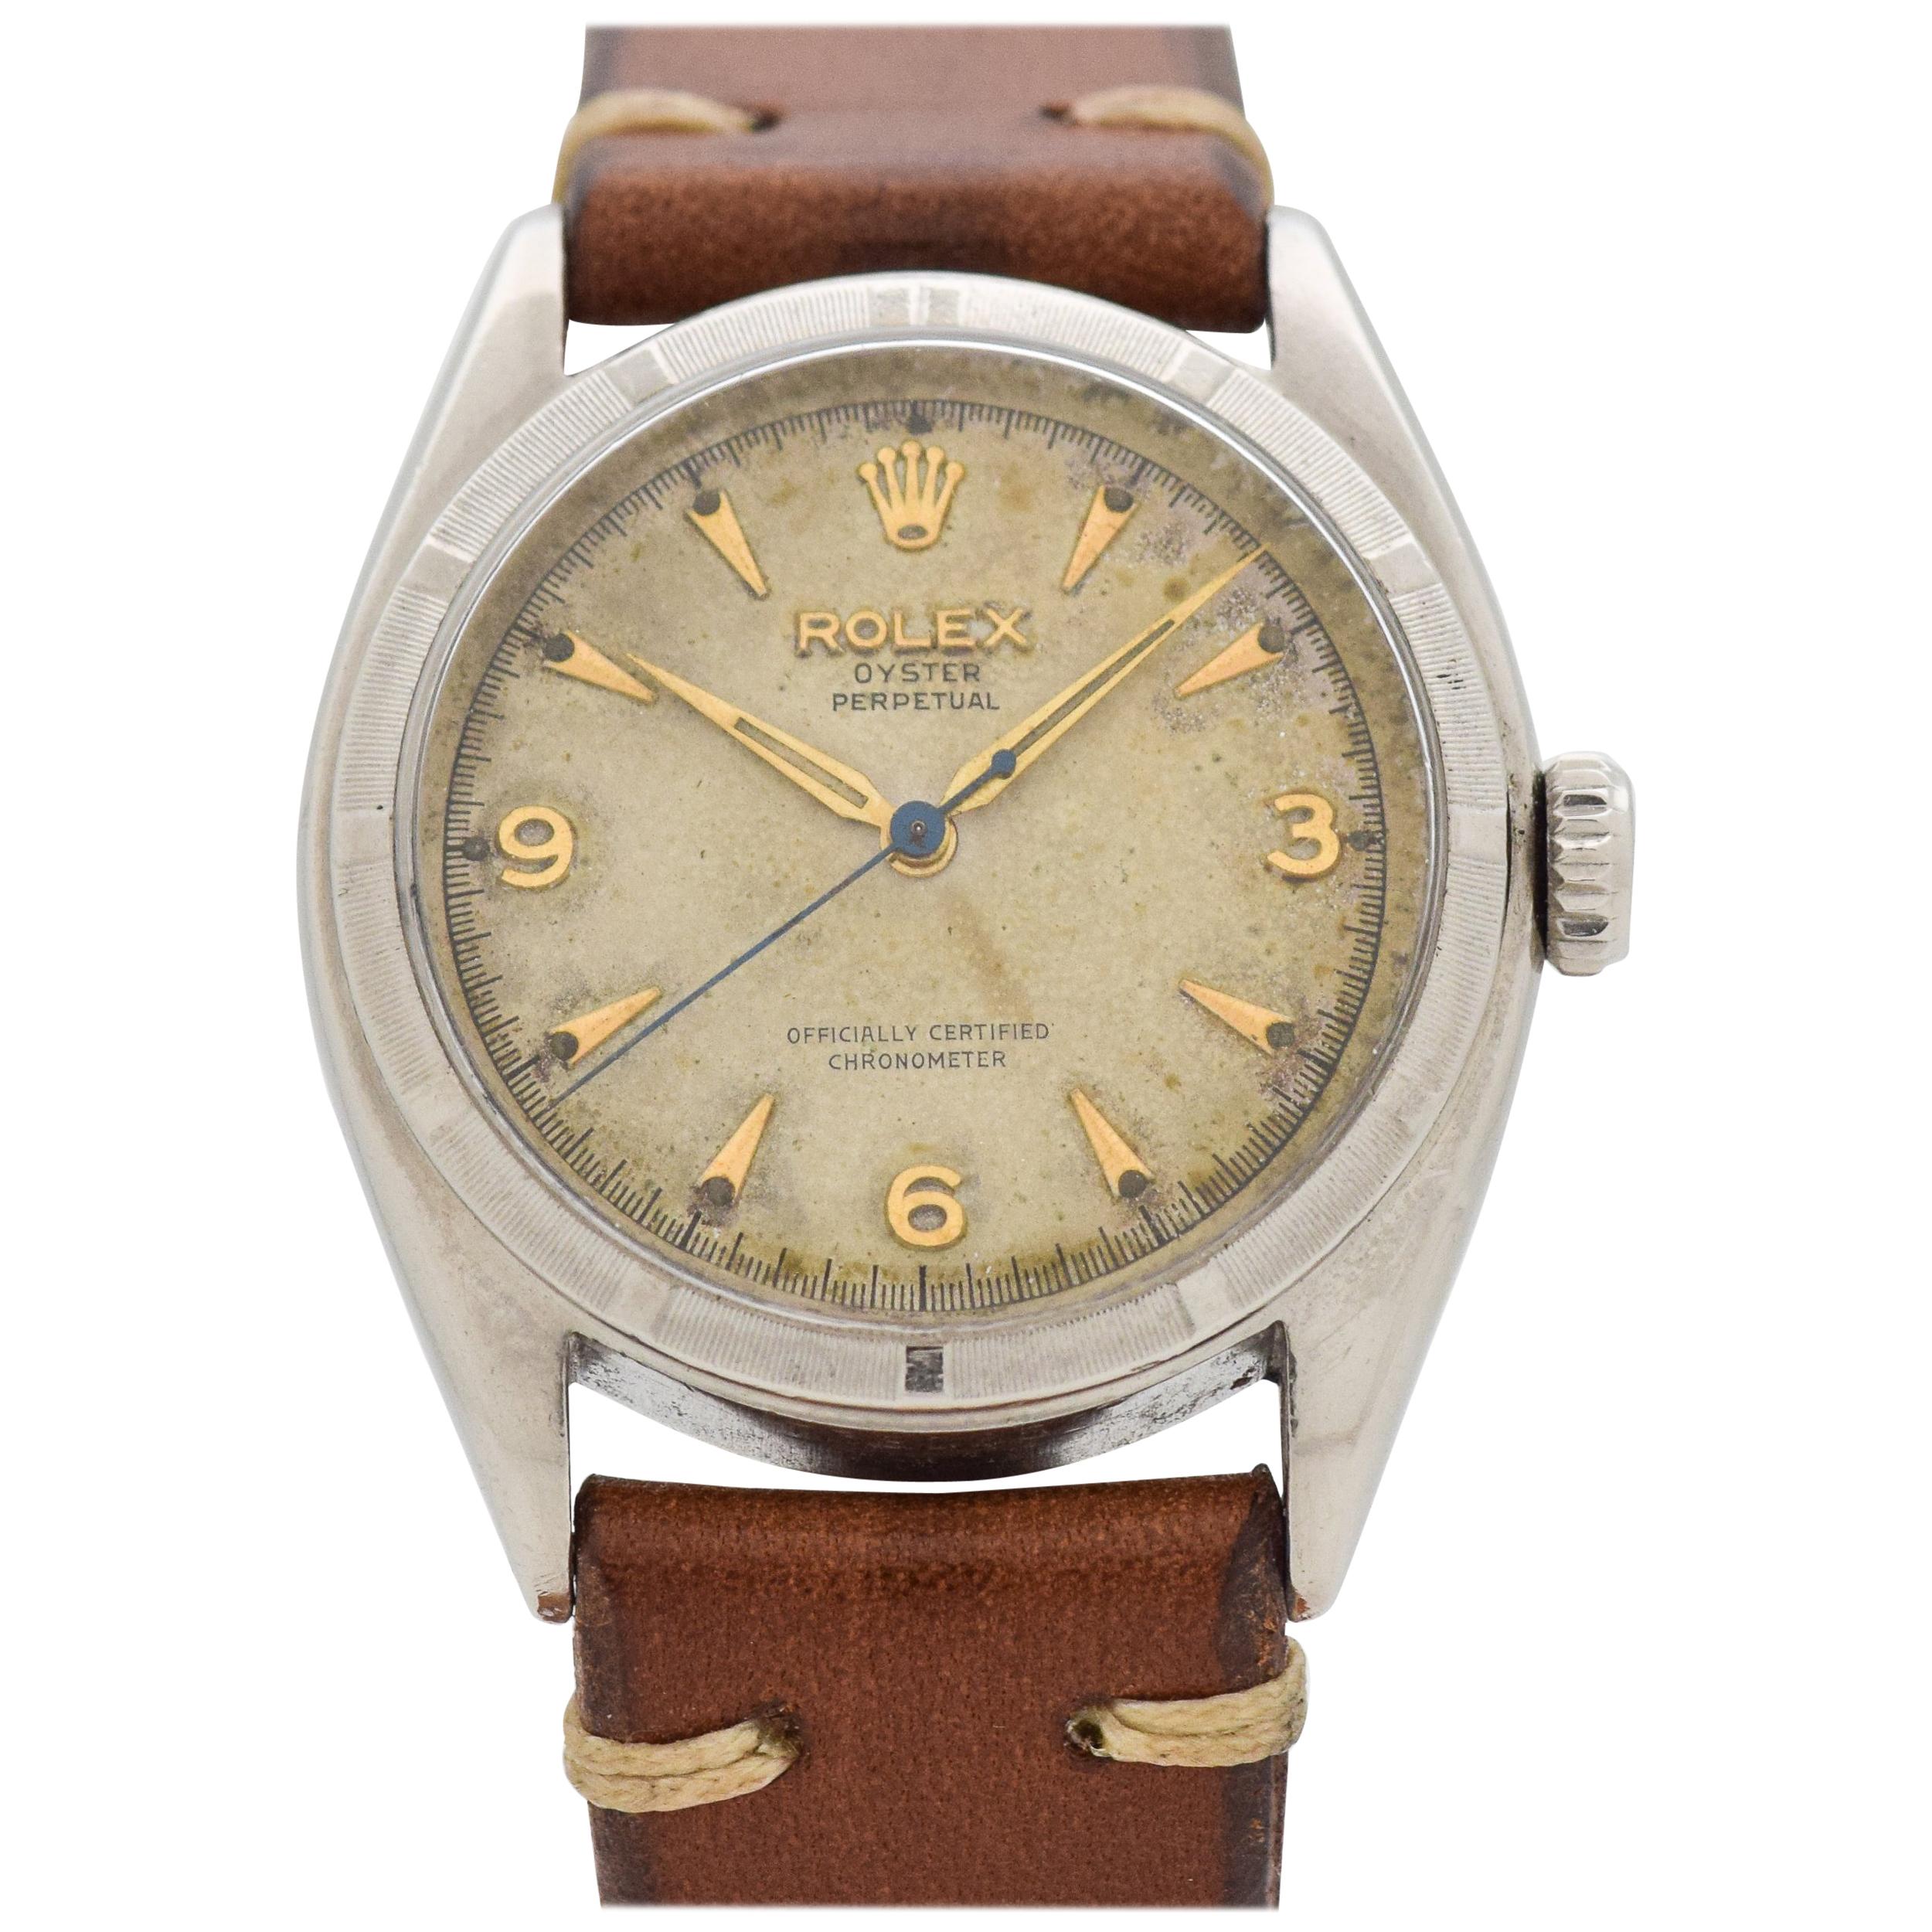 Vintage Rolex Oyster Perpetual Reference 6085 Stainless Steel Watch, 1958 For Sale